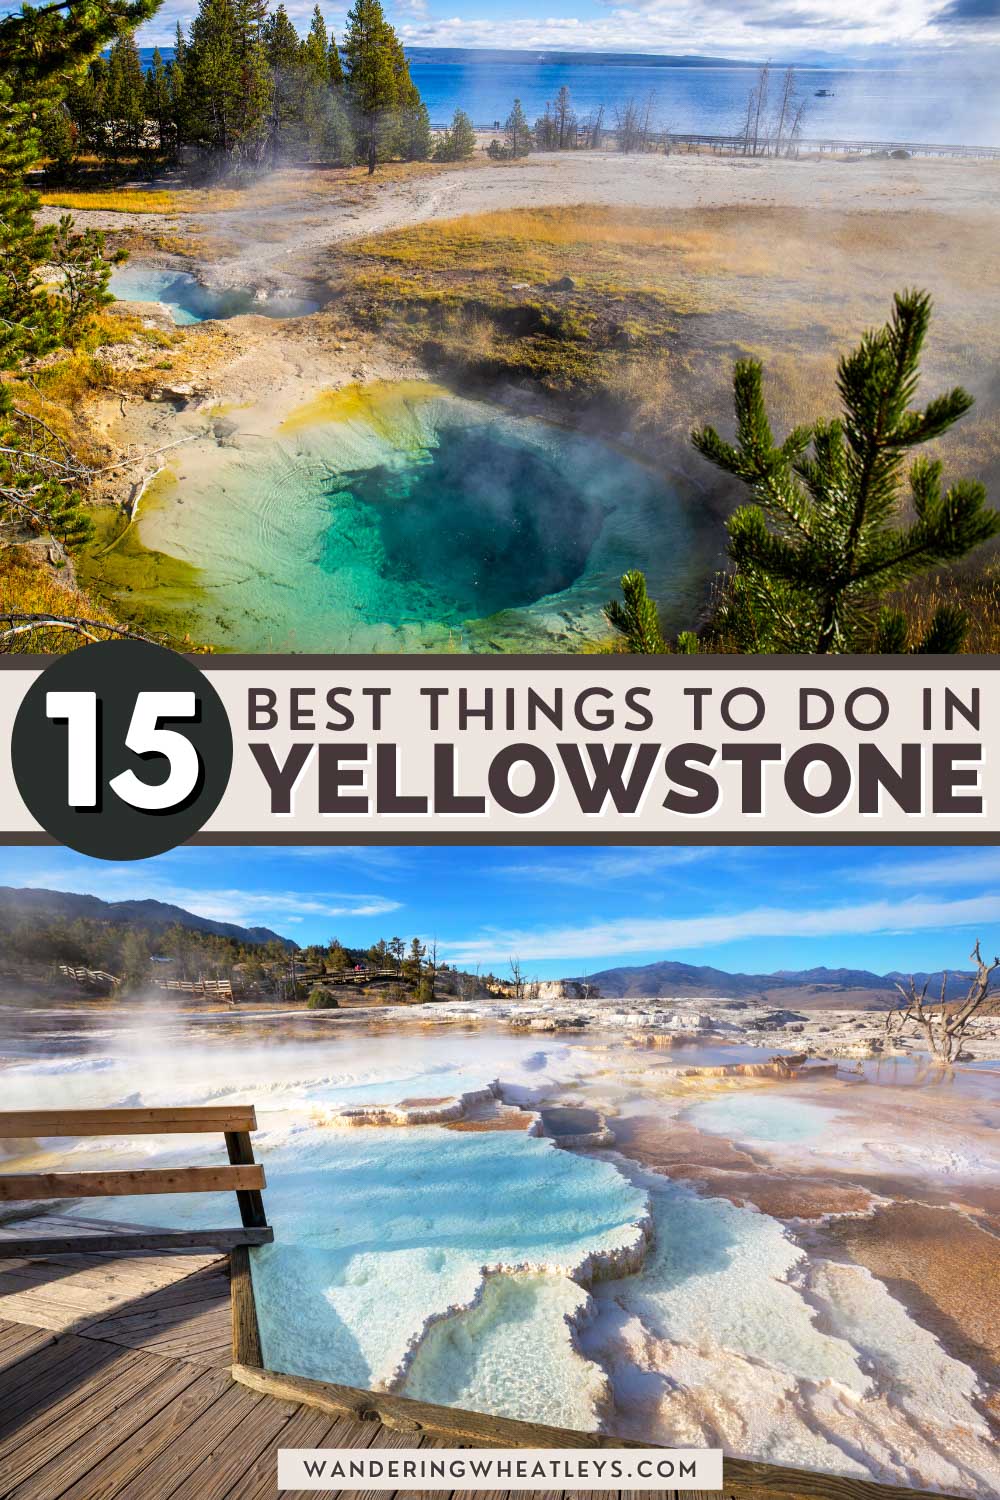 The Best Things to do in Yellowstone National Park